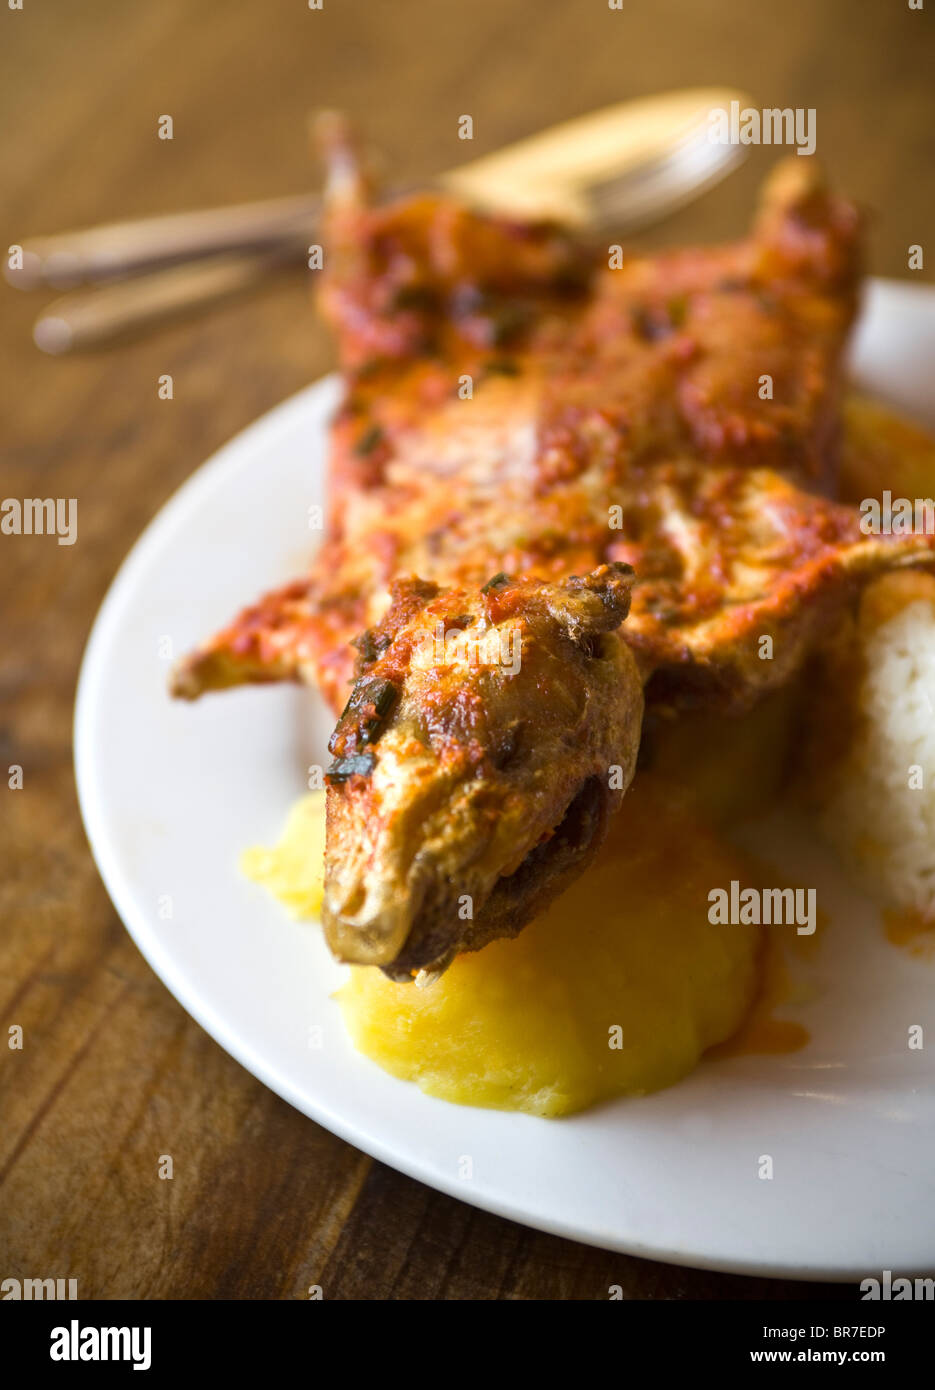 Roast Cuy or Guinea Pig served in a restaurant in Lima Peru -  An example of the strange or weird food eaten by people around the world Stock Photo